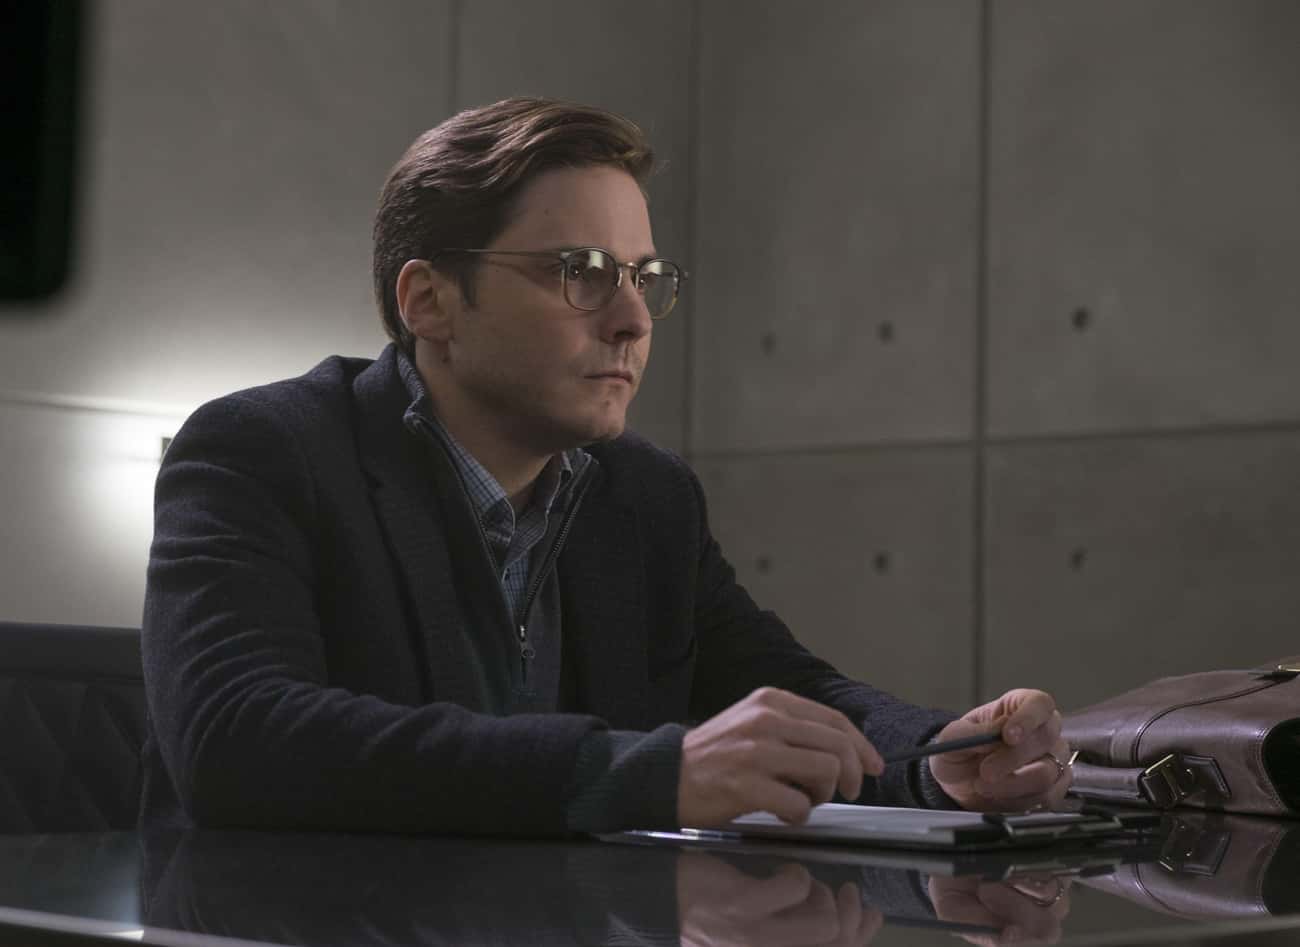 Helmut Zemo: Three Years And At Least Seven Life Sentences